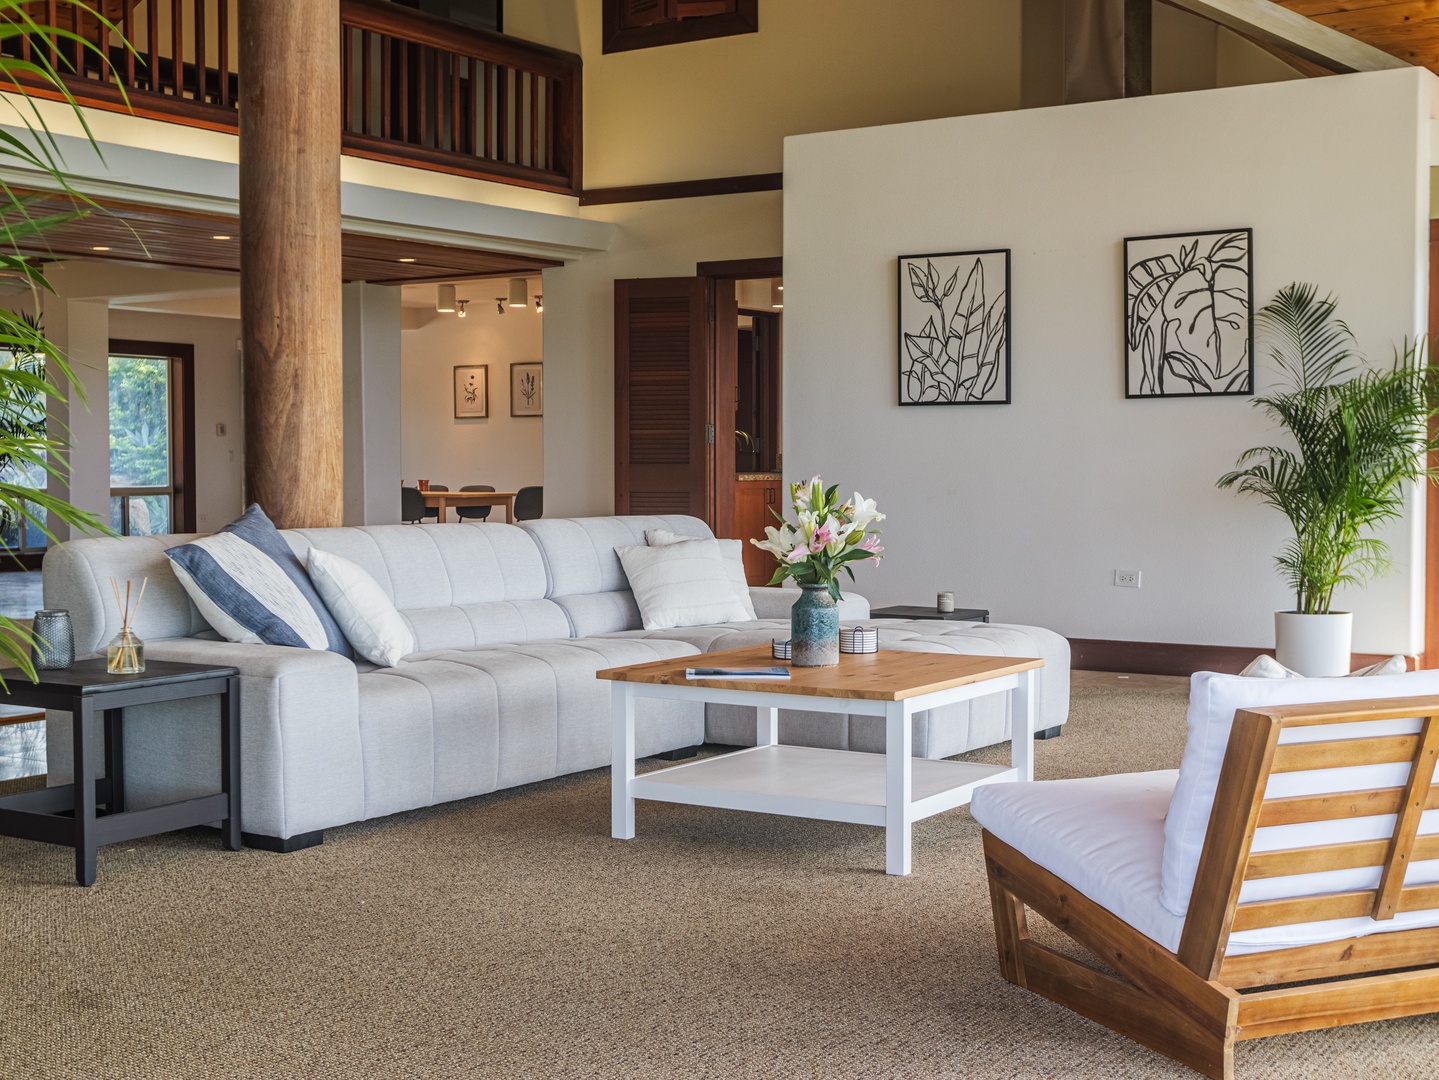 Waianae Vacation Rentals, Konishiki Beachhouse - Elegant living room with plush seating and a warm, inviting atmosphere.